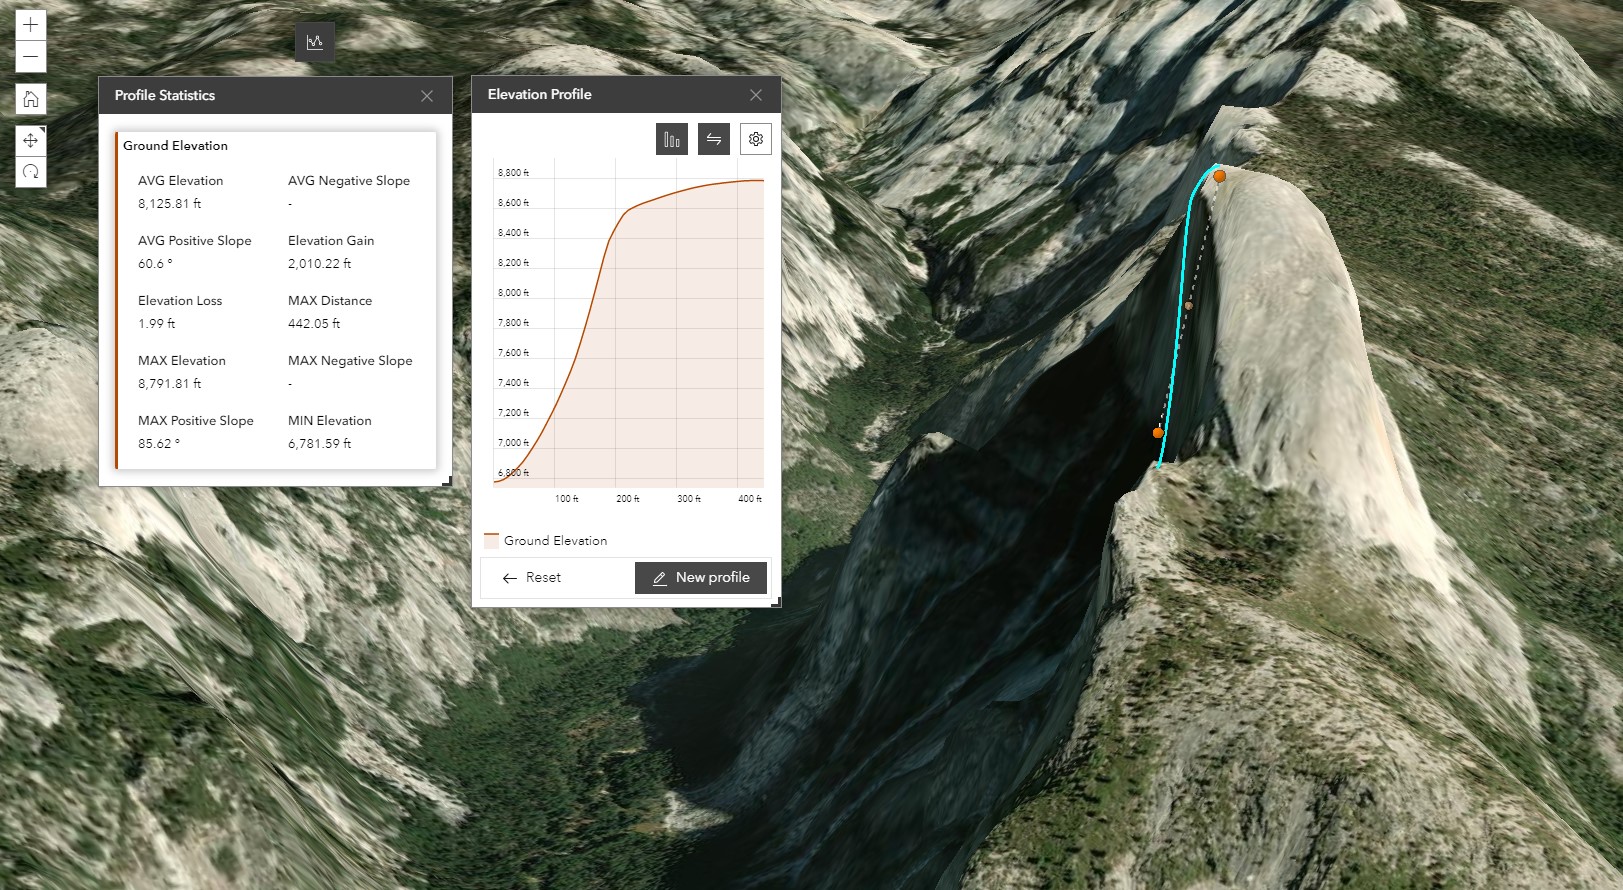 Elevation profile for Half Dome example to help build GIS web experiences using ArcGIS Experience Builder